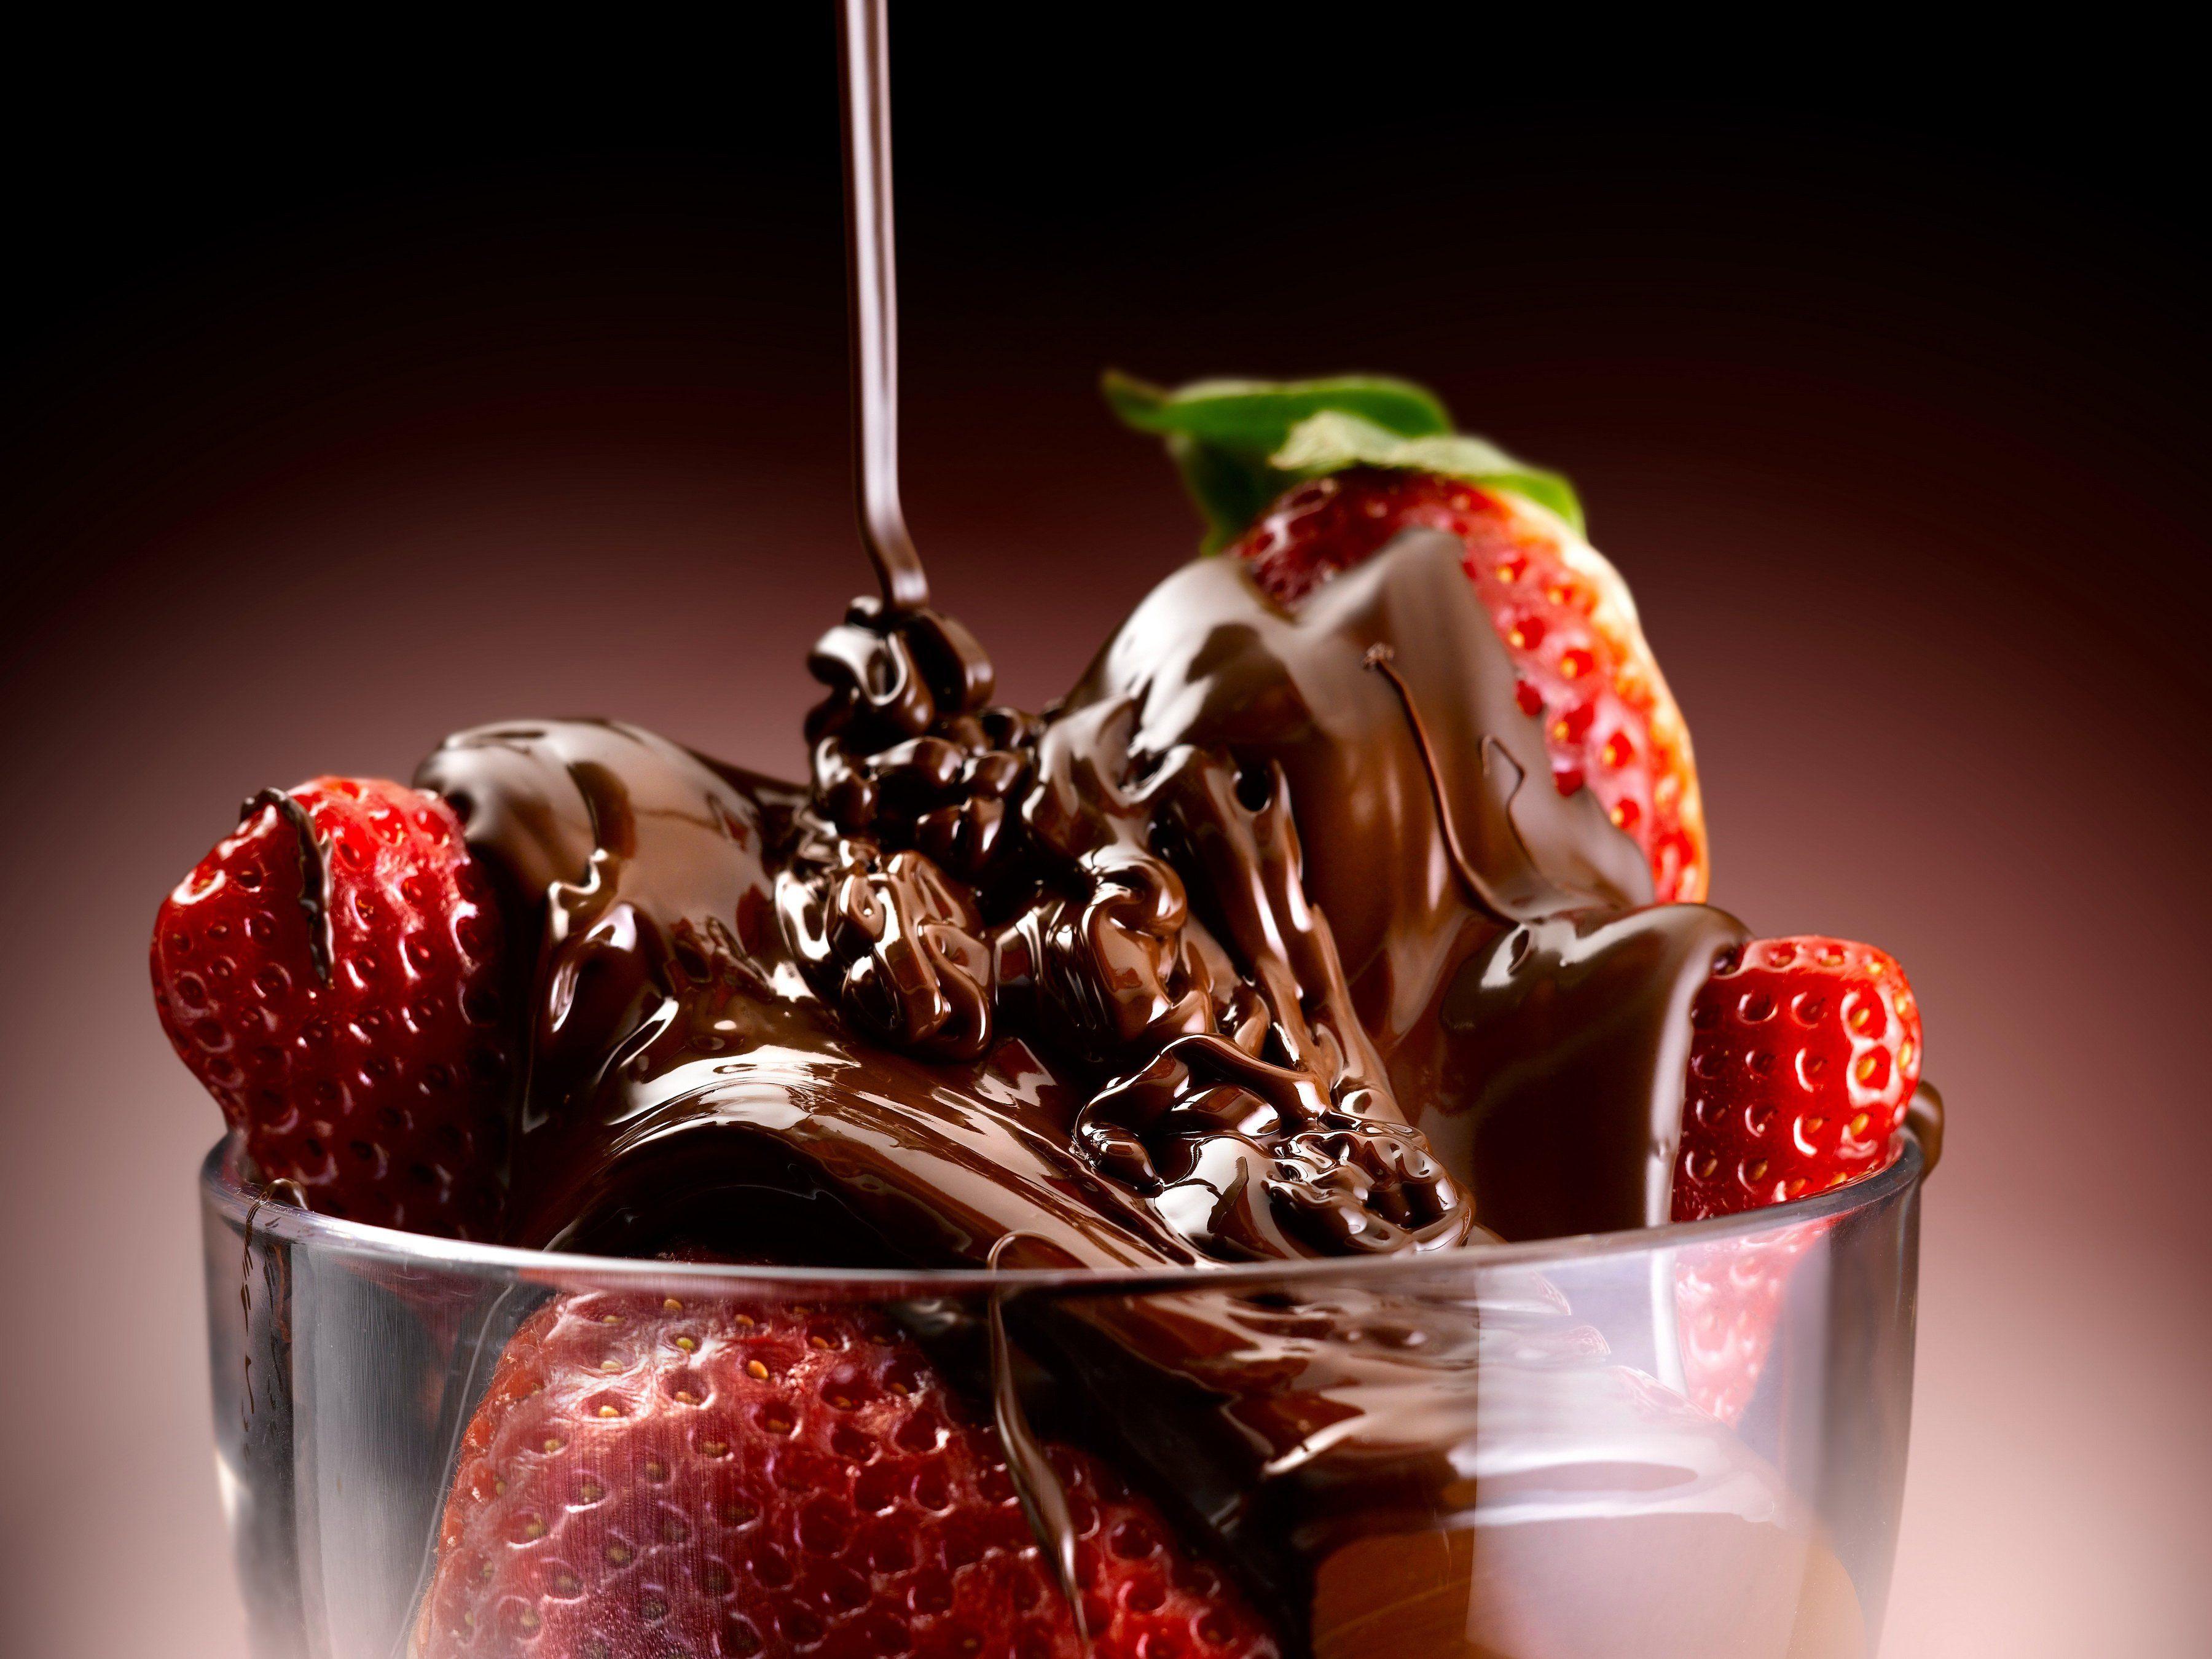 Chocolate Desserts In a Glass HD Wallpaper, Background Image